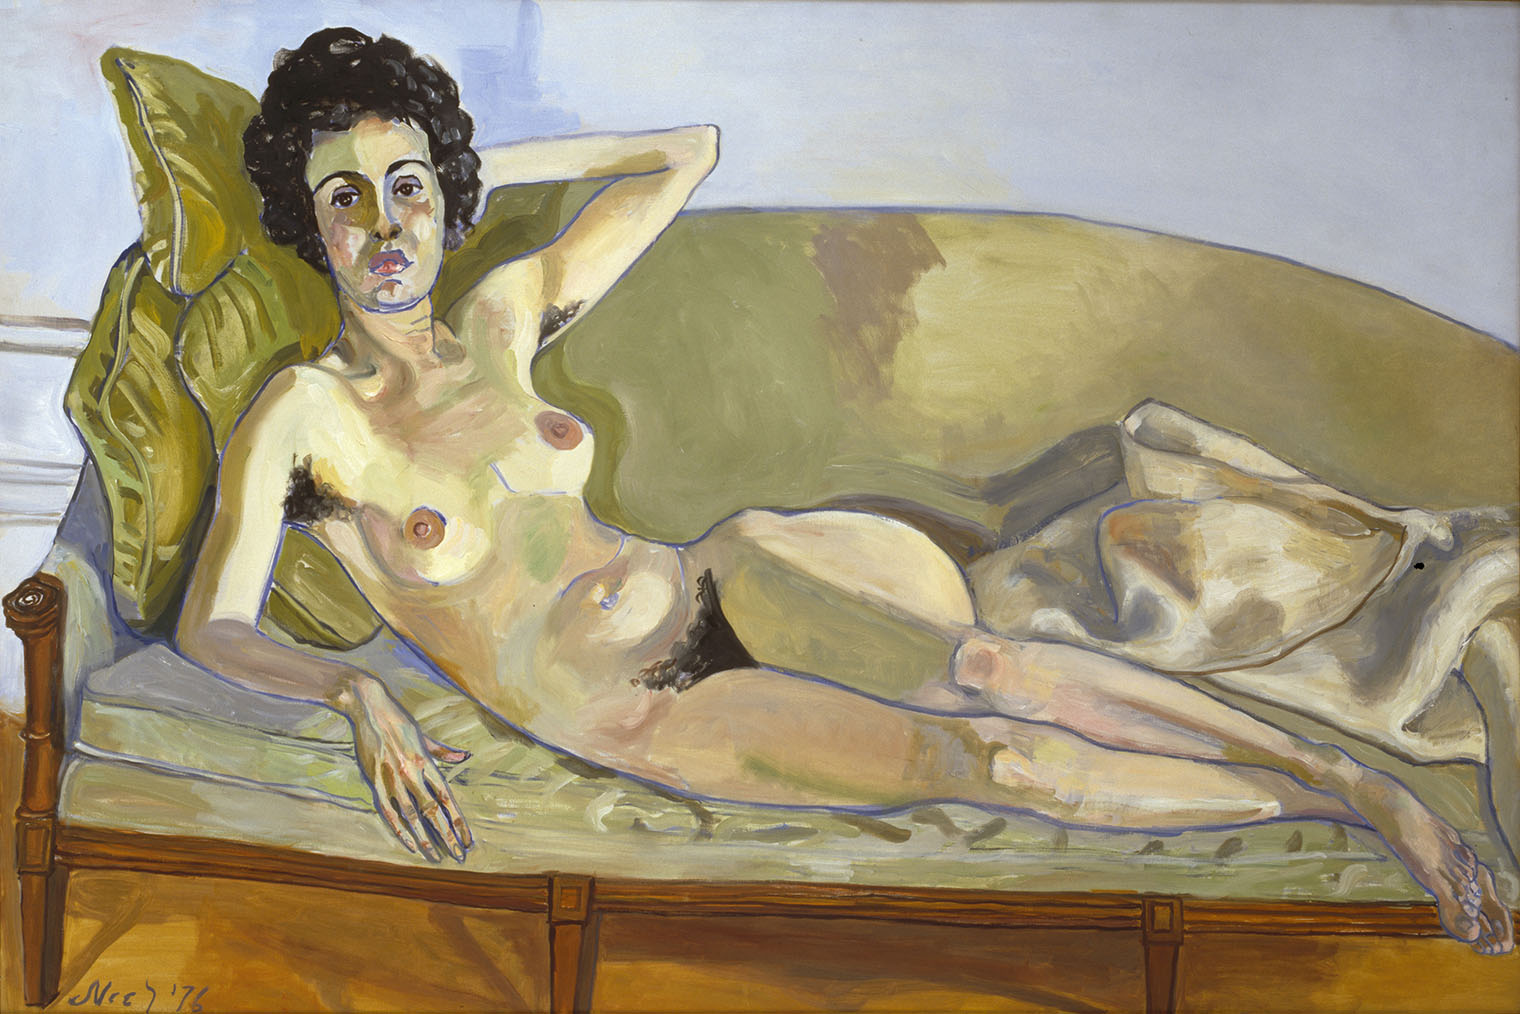 A painting of a nude woman reclining on a sofa